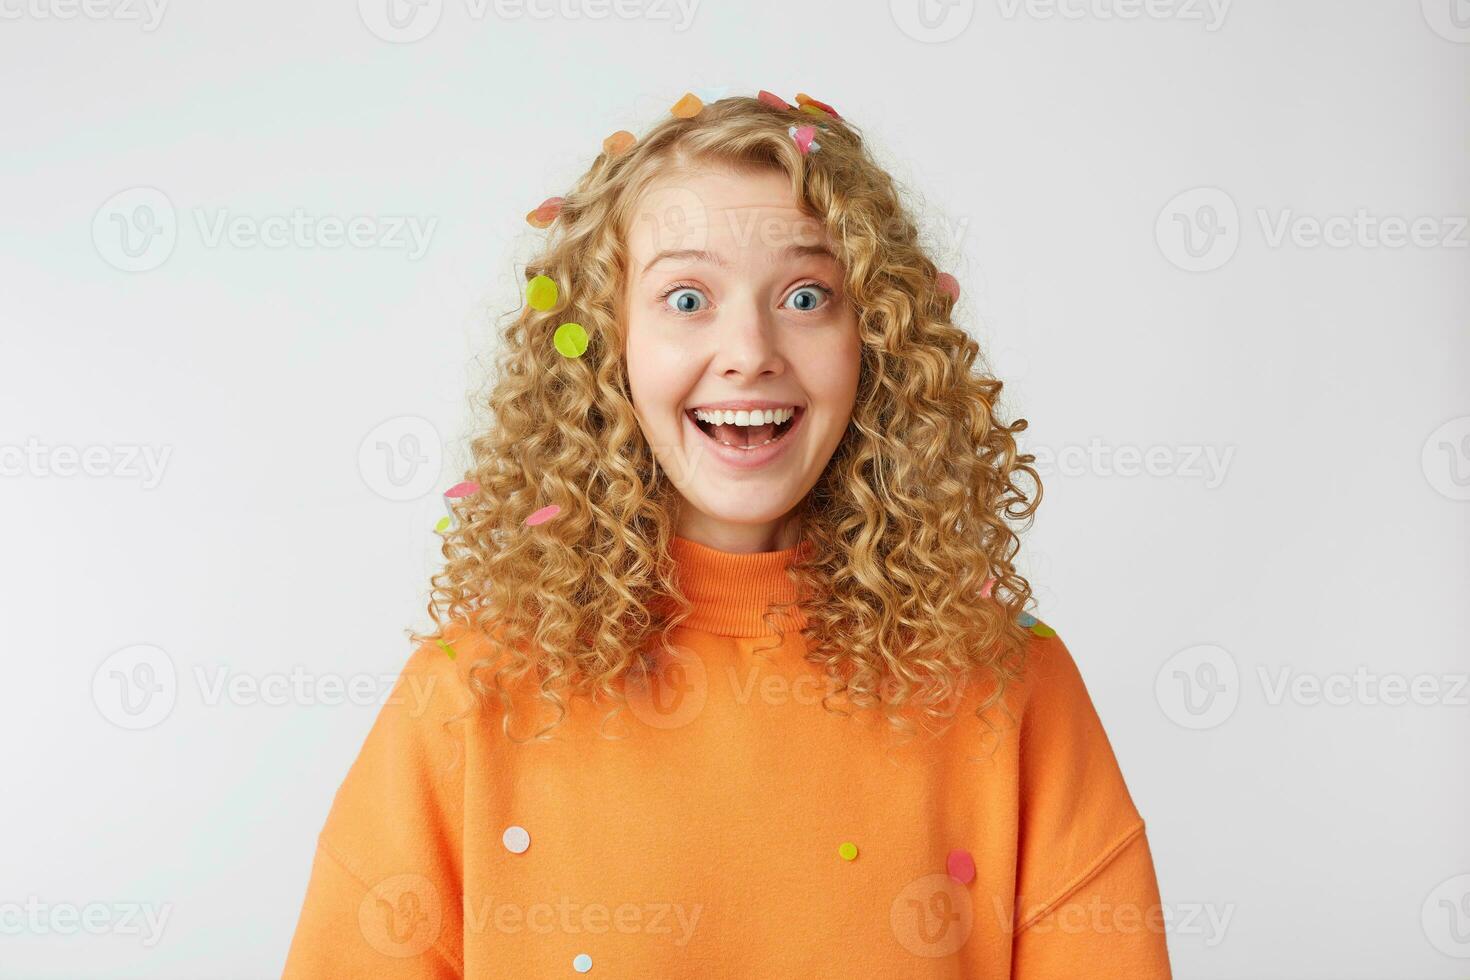 Surprised joyful inspired blonde with wide open blue eyes happily smiling feels glad satisfied dressed in an orange oversized sweater isolated on a white background photo